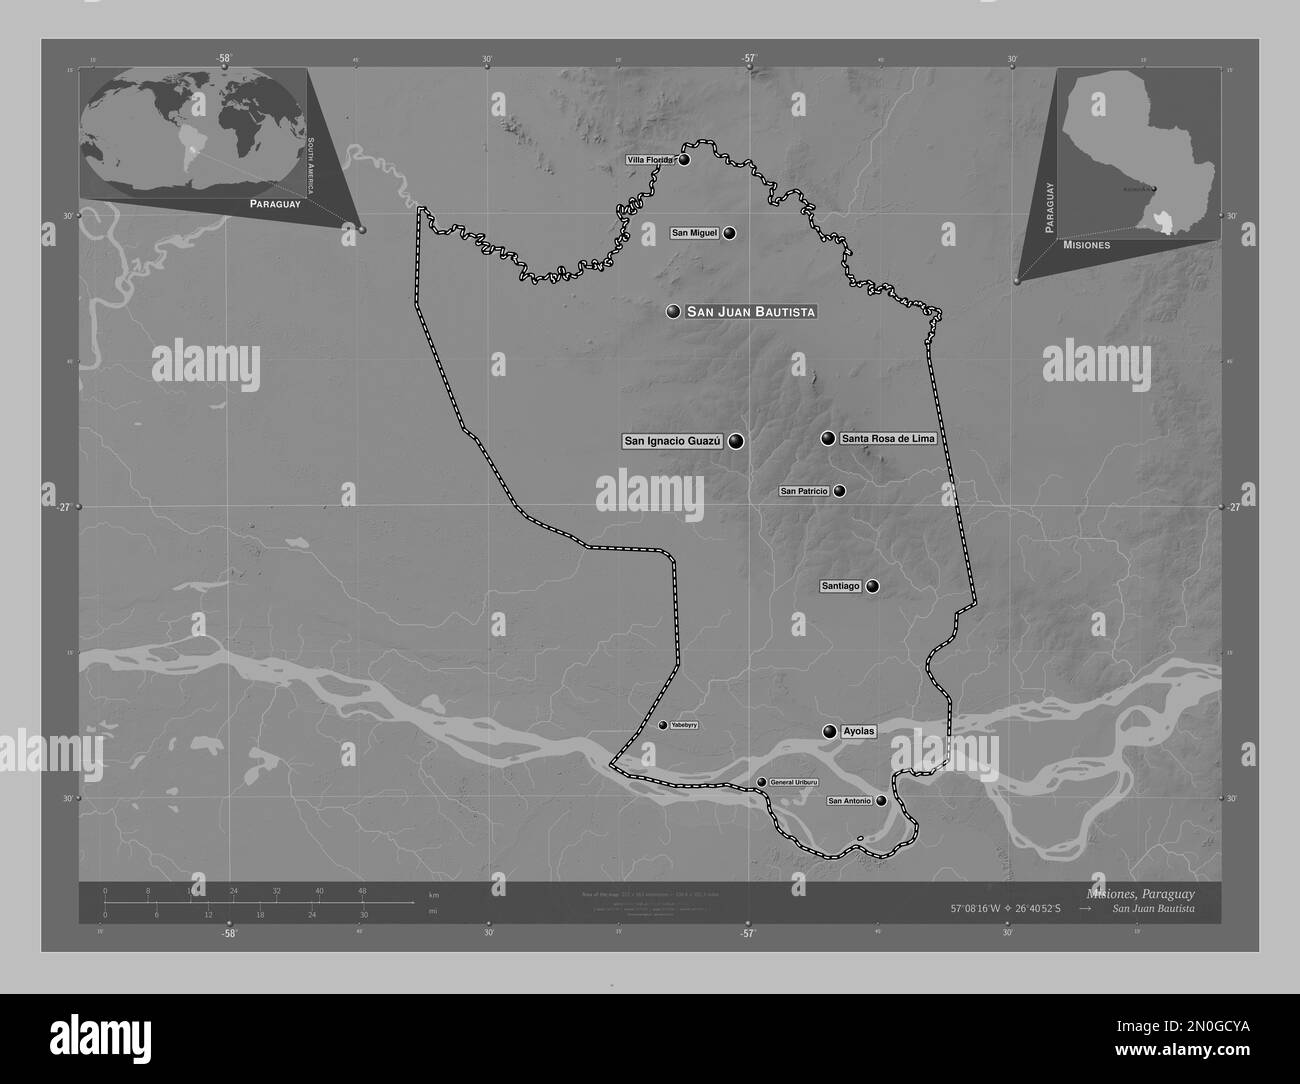 Misiones, department of Paraguay. Grayscale elevation map with lakes and rivers. Locations and names of major cities of the region. Corner auxiliary l Stock Photo